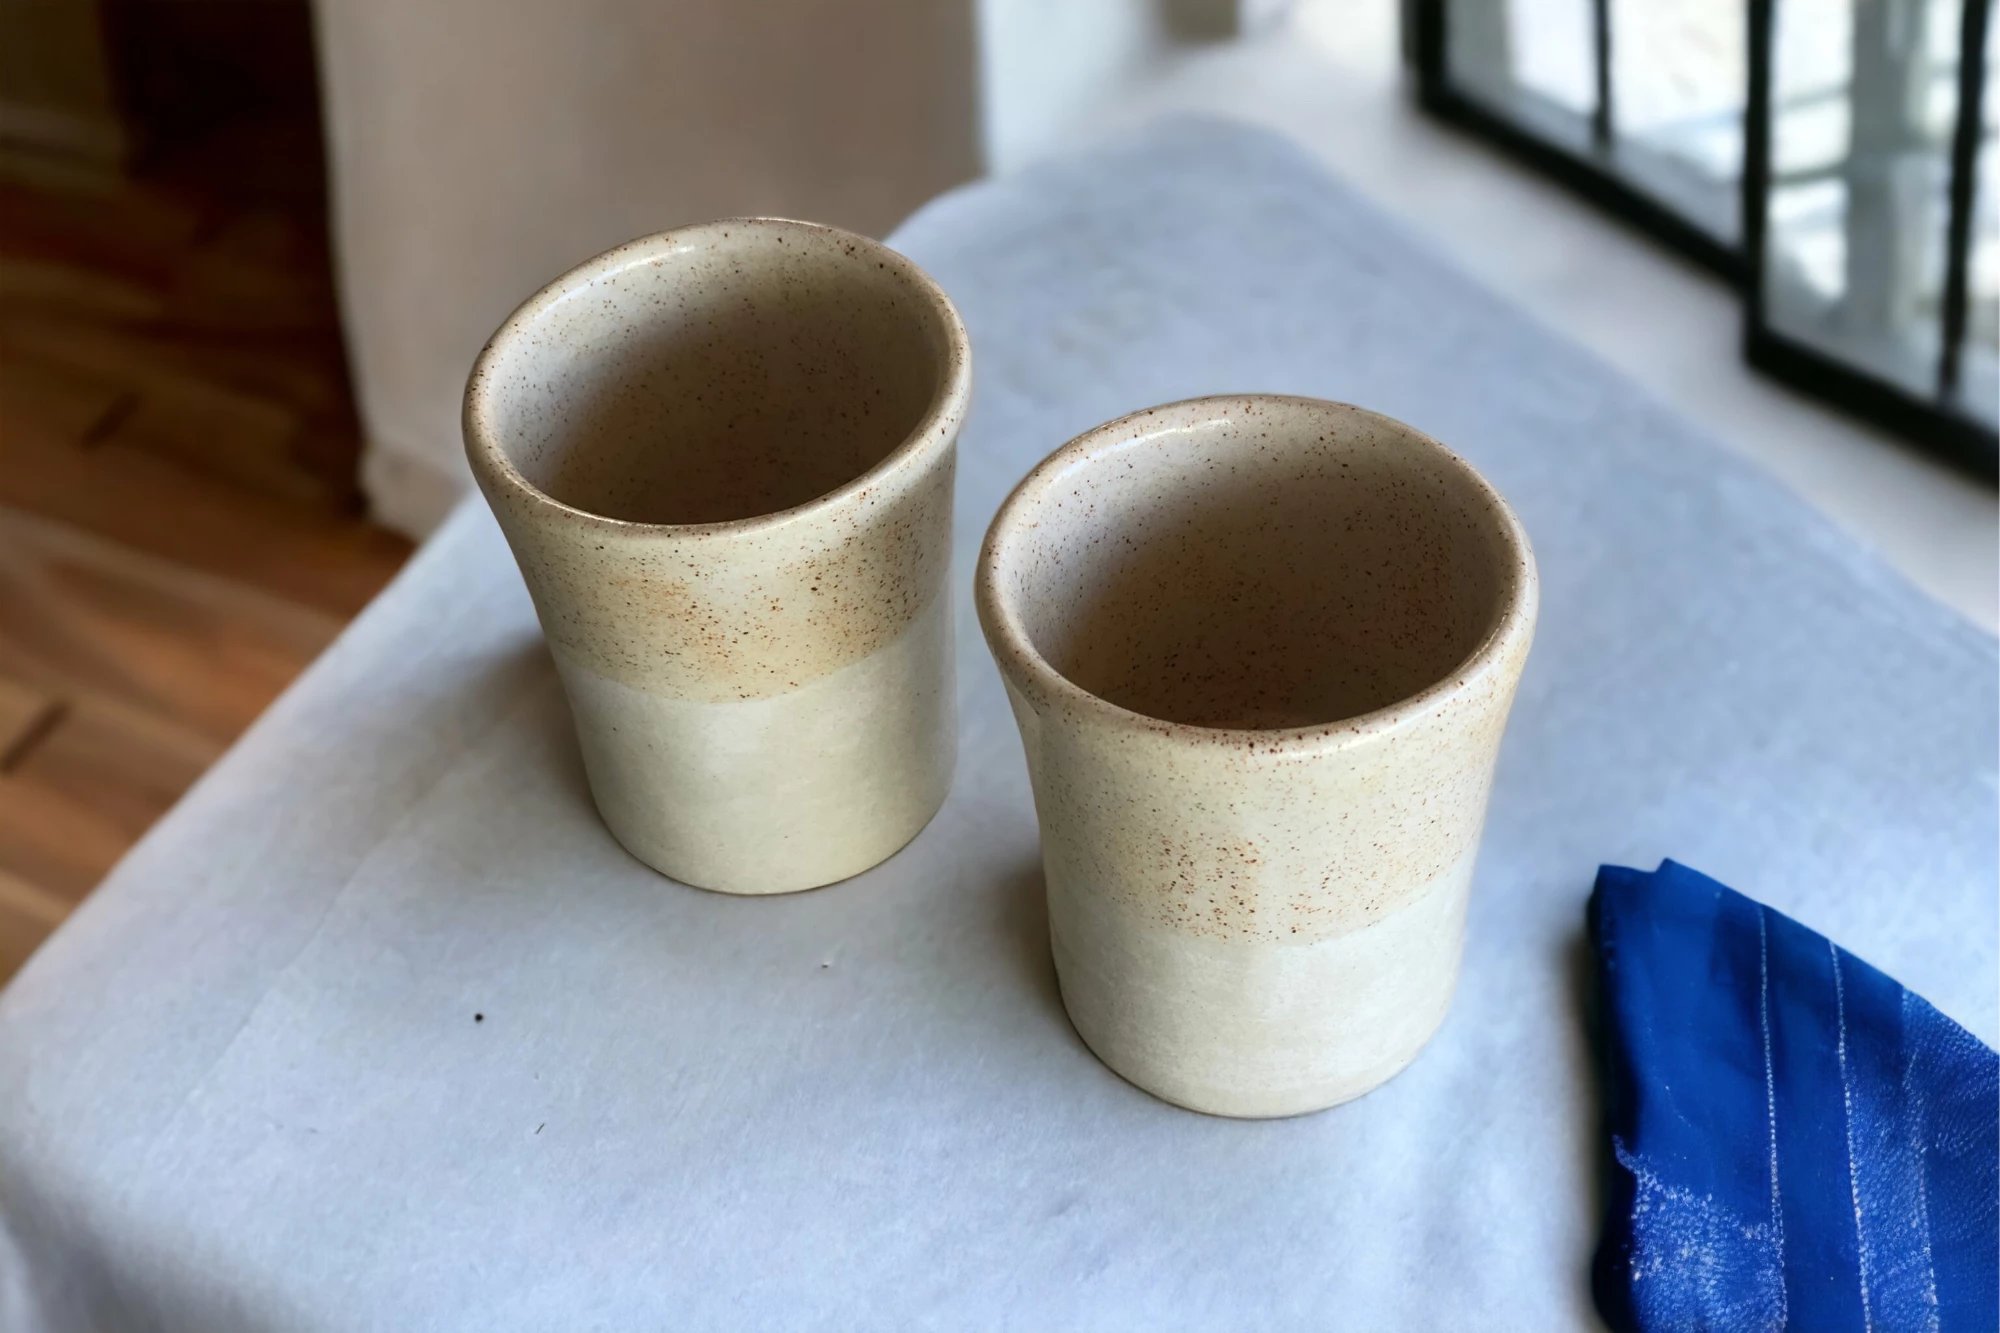 my little cups
SET of TWO
